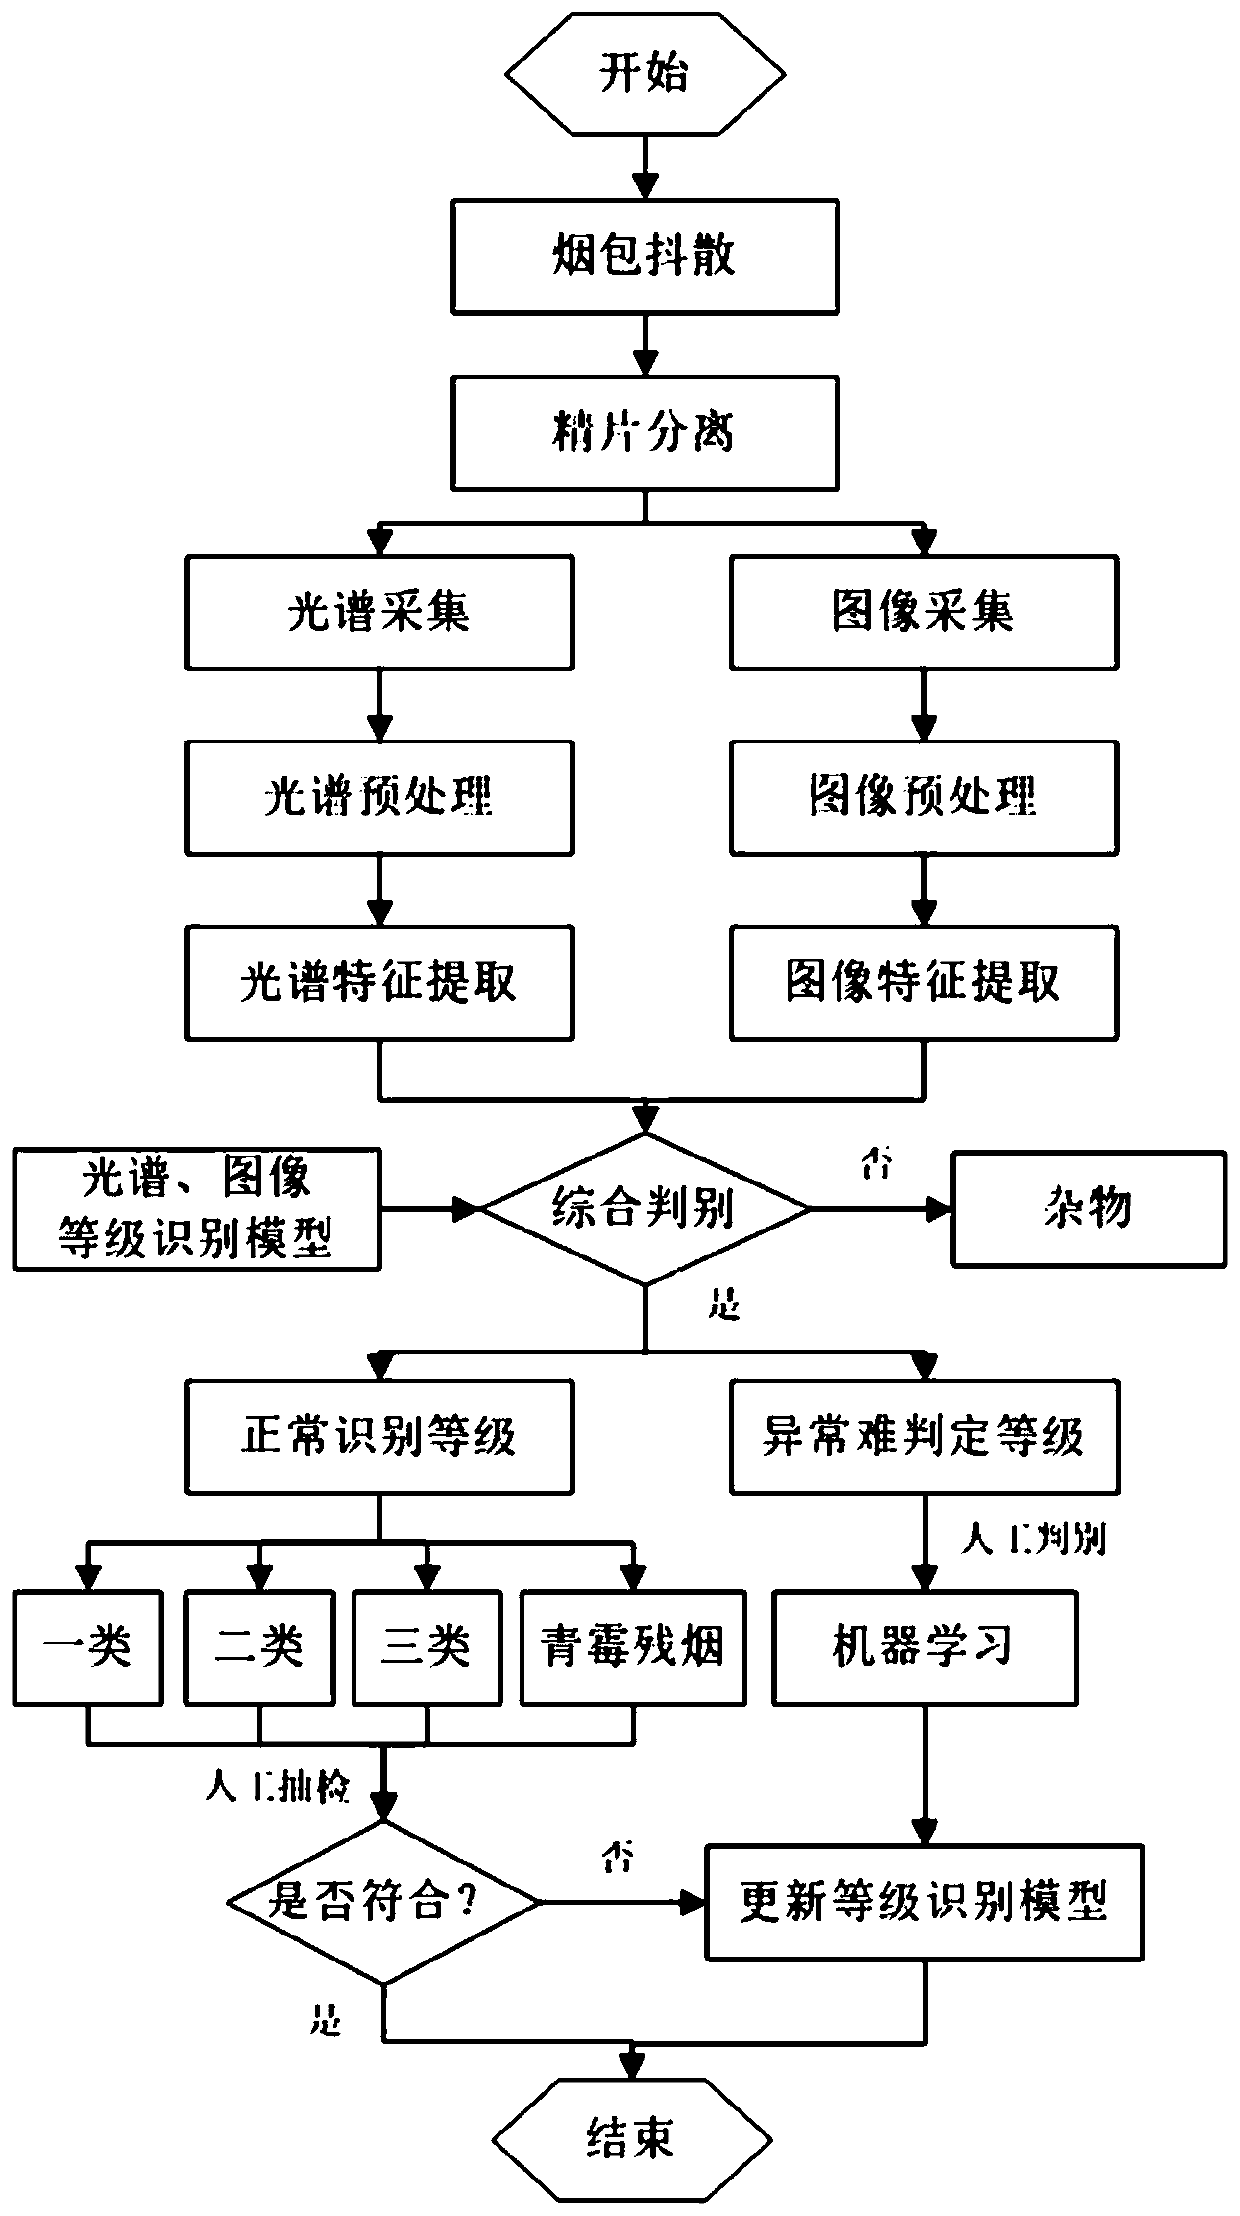 Tobacco grade automatic identification and sorting method